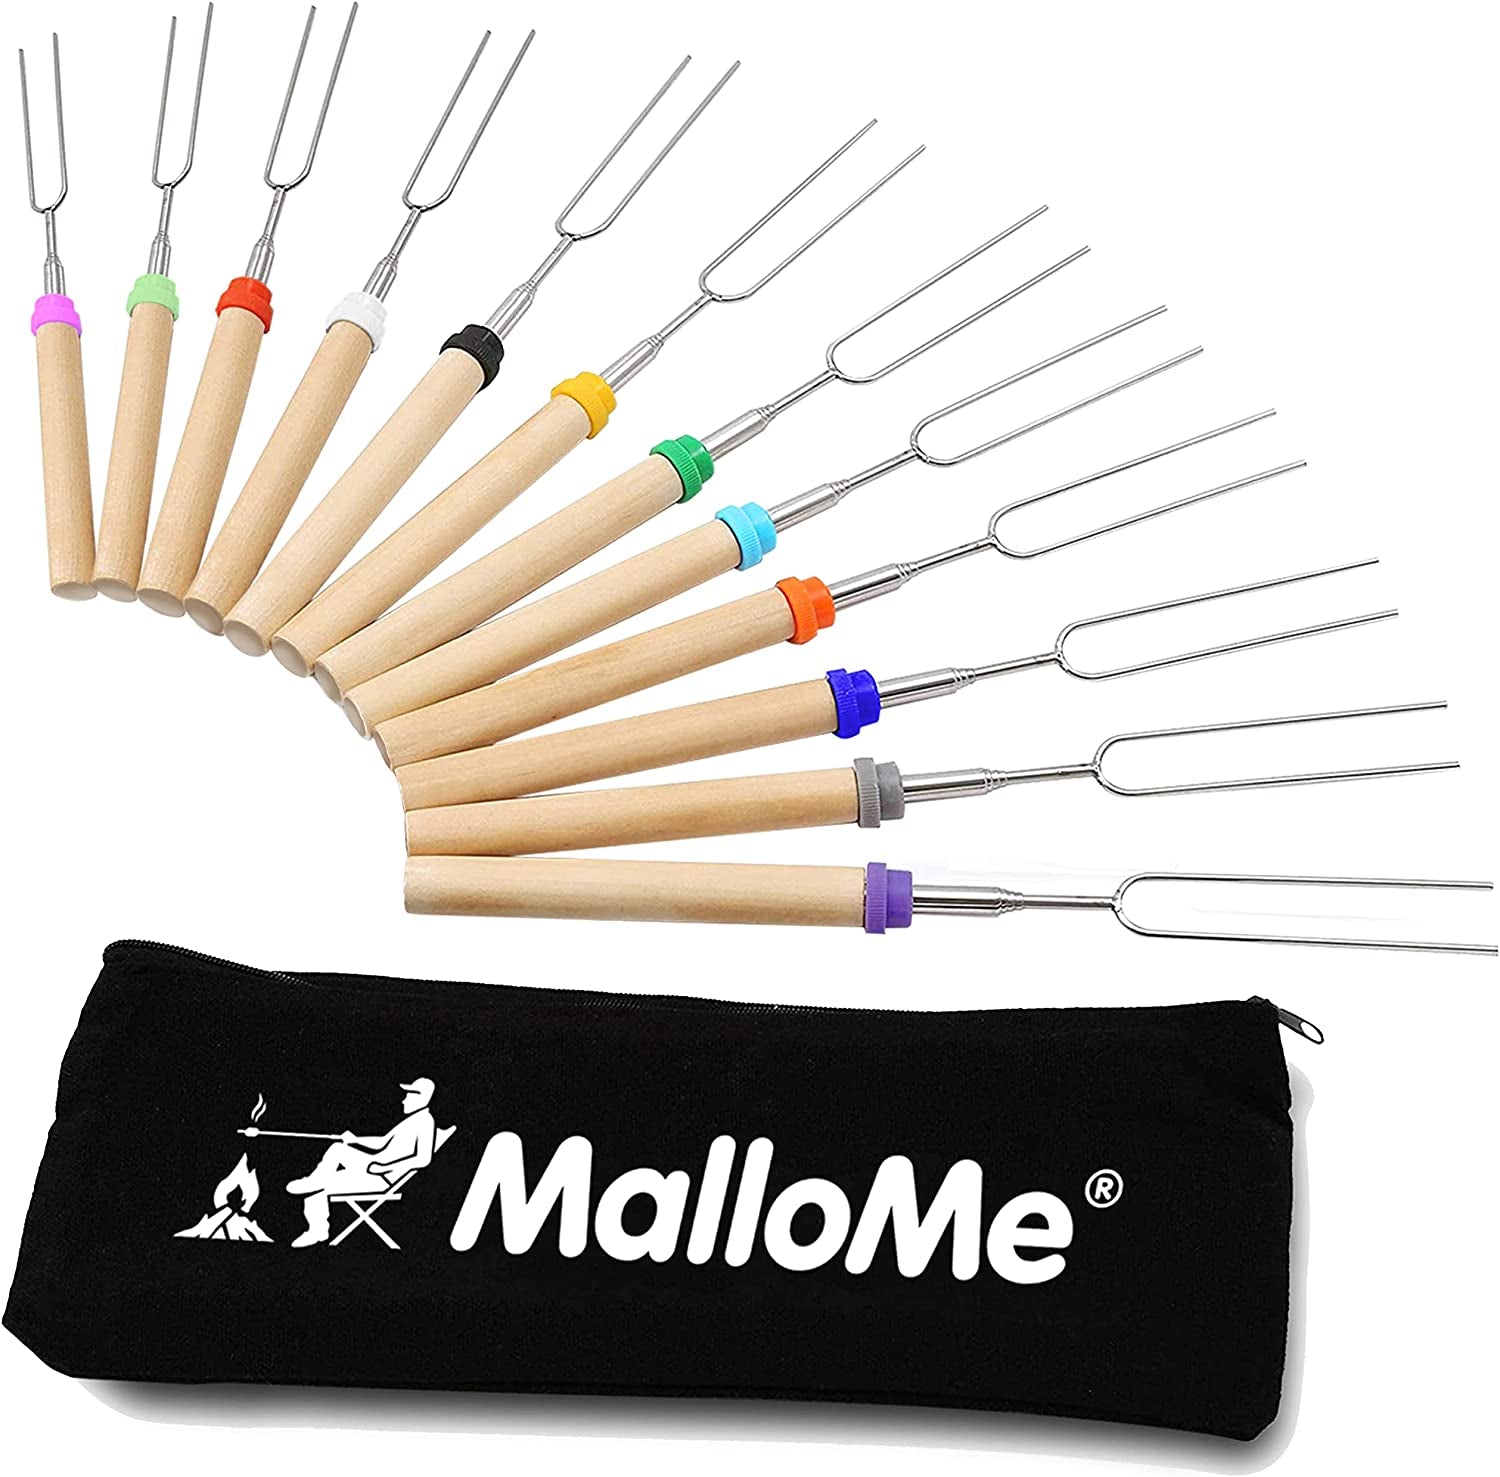 Mallome Smores Sticks for Fire Pit Long - Marshmallow Roasting Sticks Smores Kit - Smore Skewers Hot Dog Fork Campfire Cooking Equipment, Camping Essentials S'Mores Gear Outdoor Accessories 32" 5 Pack